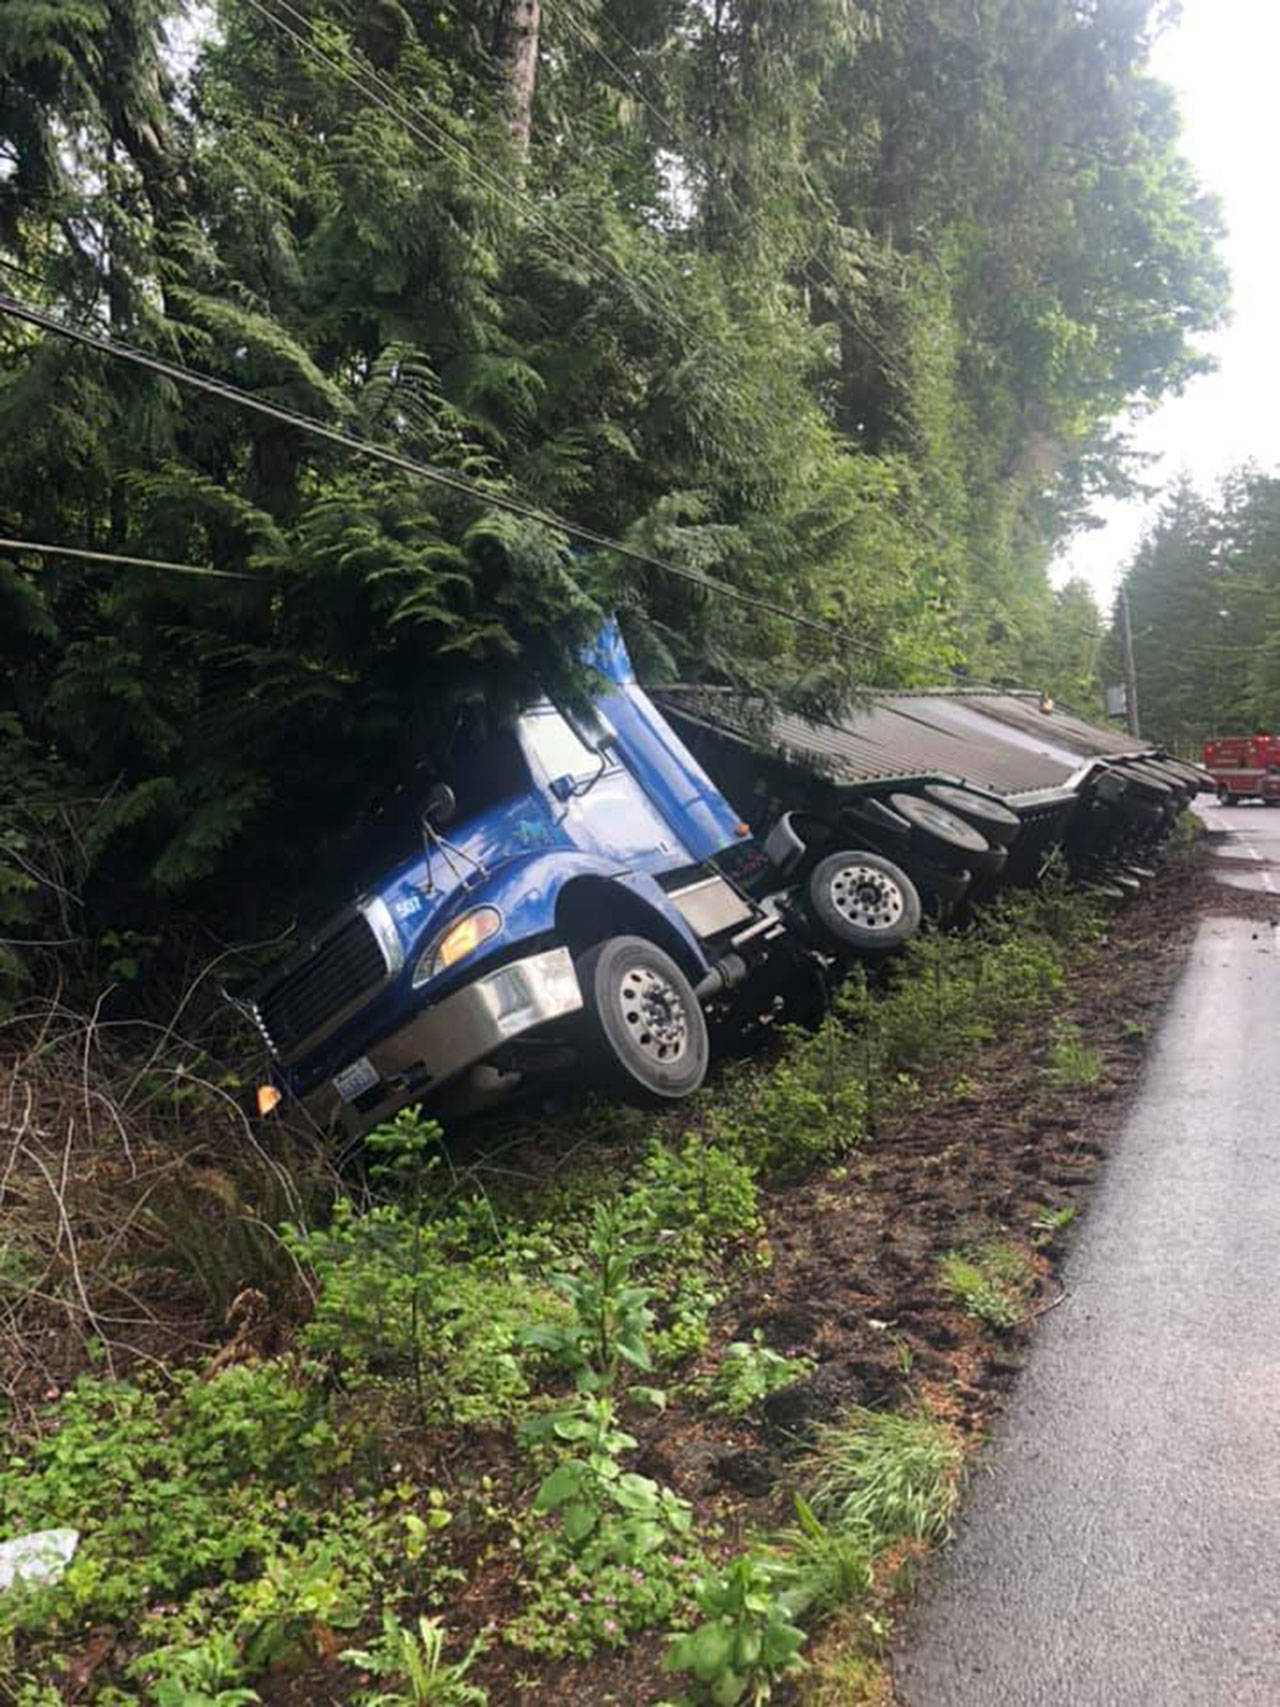 Crews are responding to a semi-truck that rolled over on state Highway 101 at milepost 308. Officials said drivers can expect delays of more than two hours. (Brinnon Fire Department)